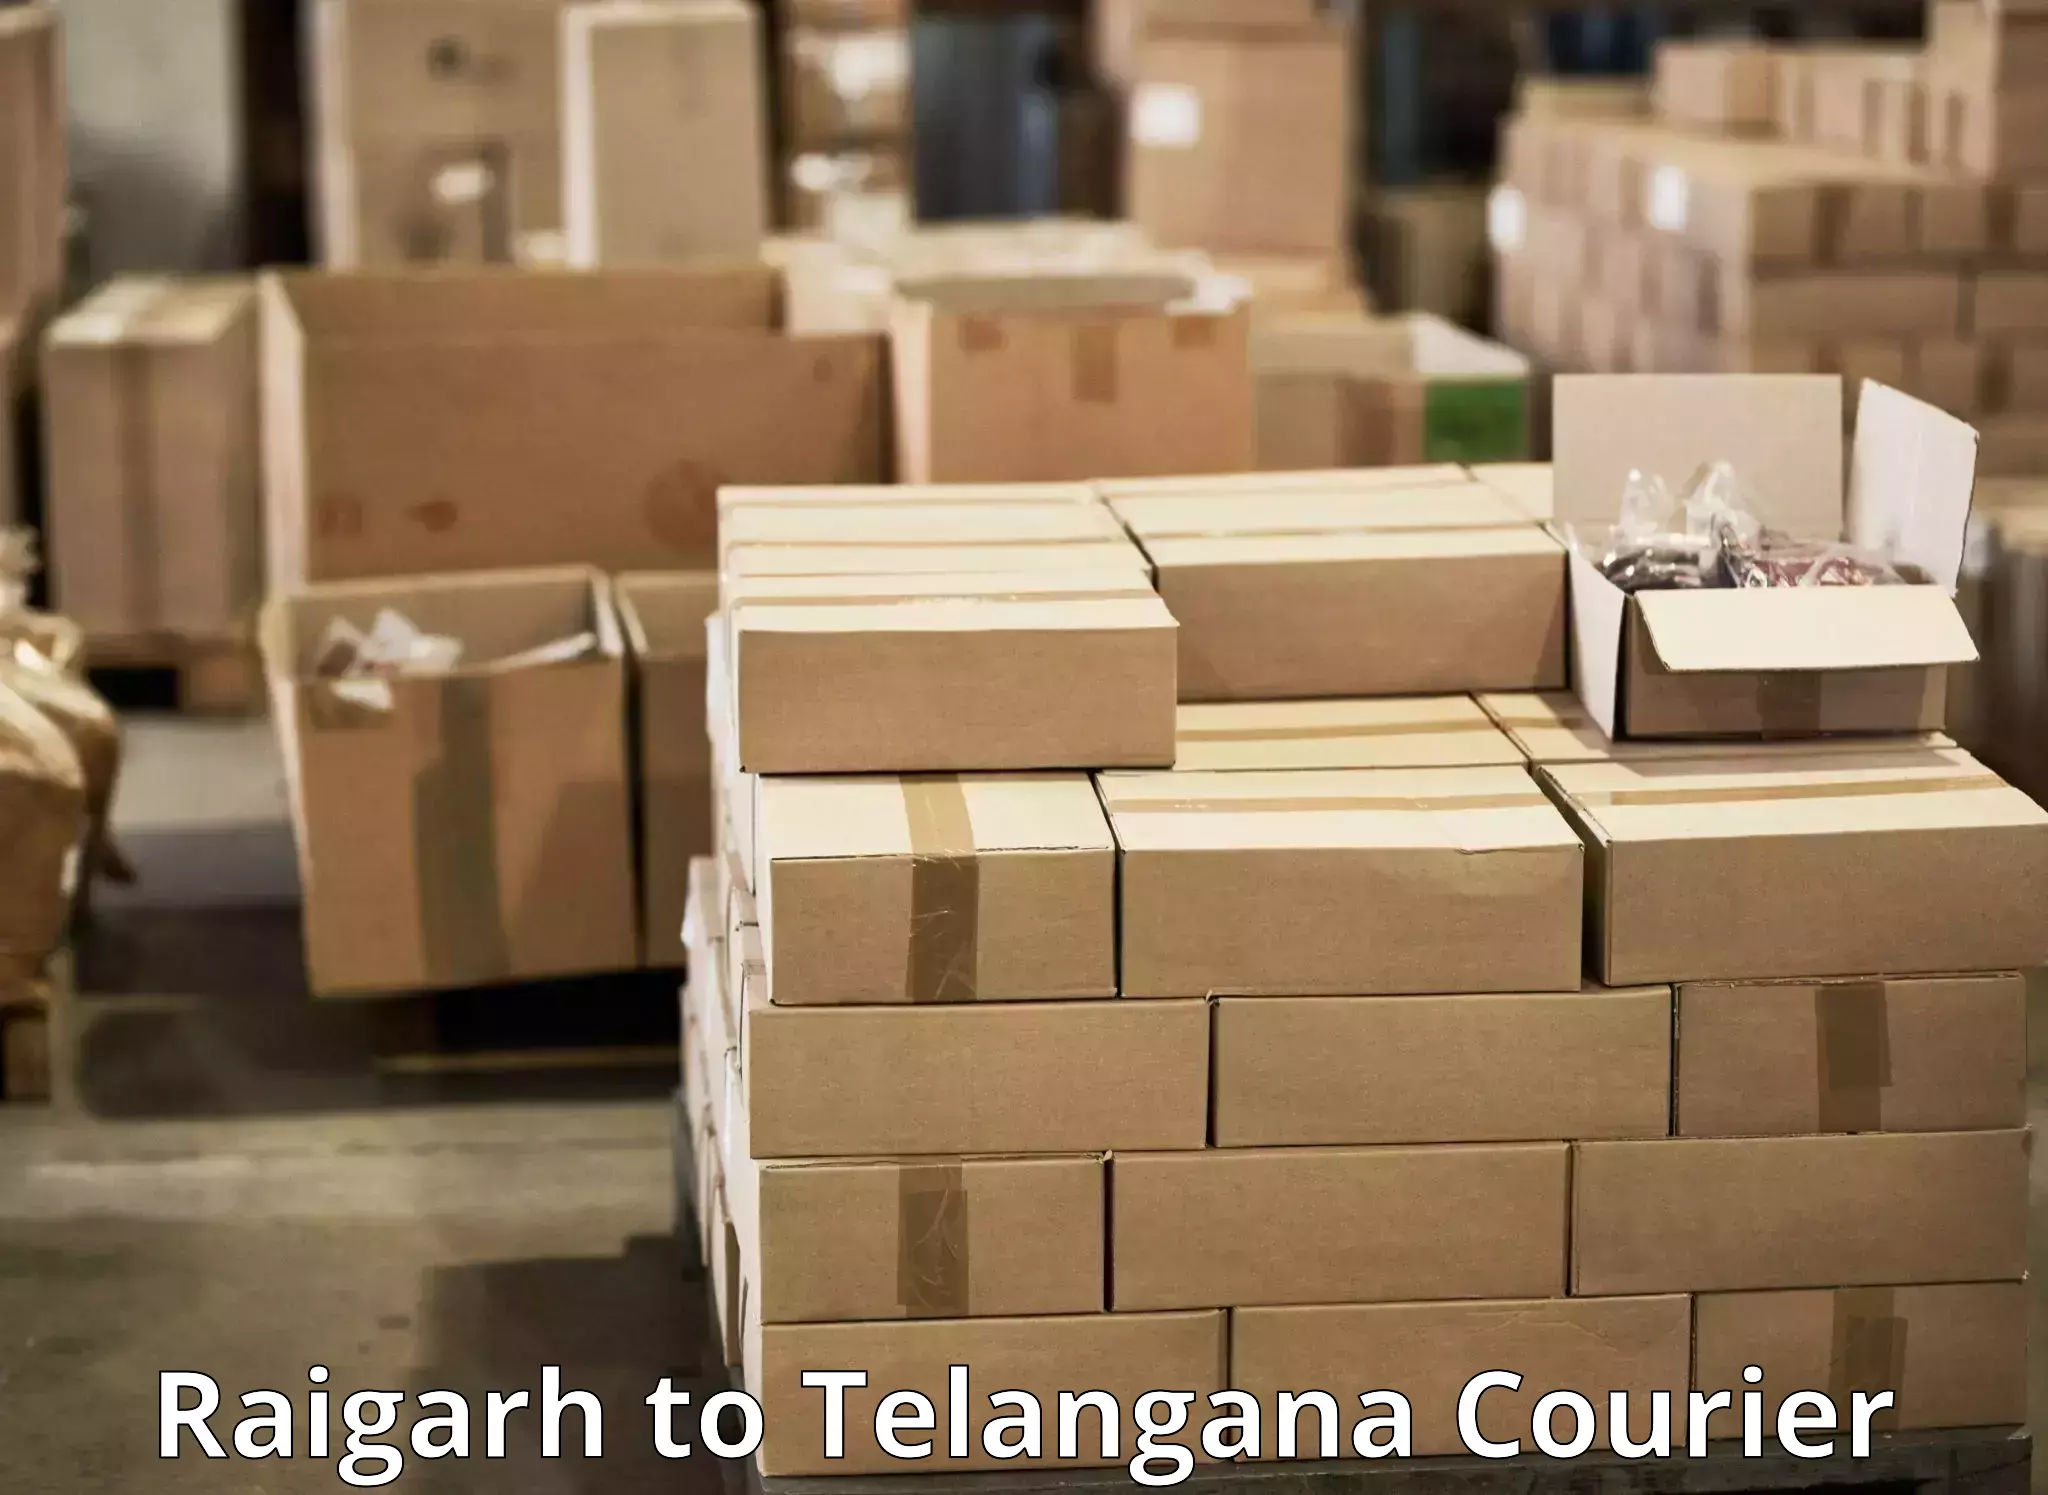 Courier rate comparison Raigarh to Osmania University Hyderabad